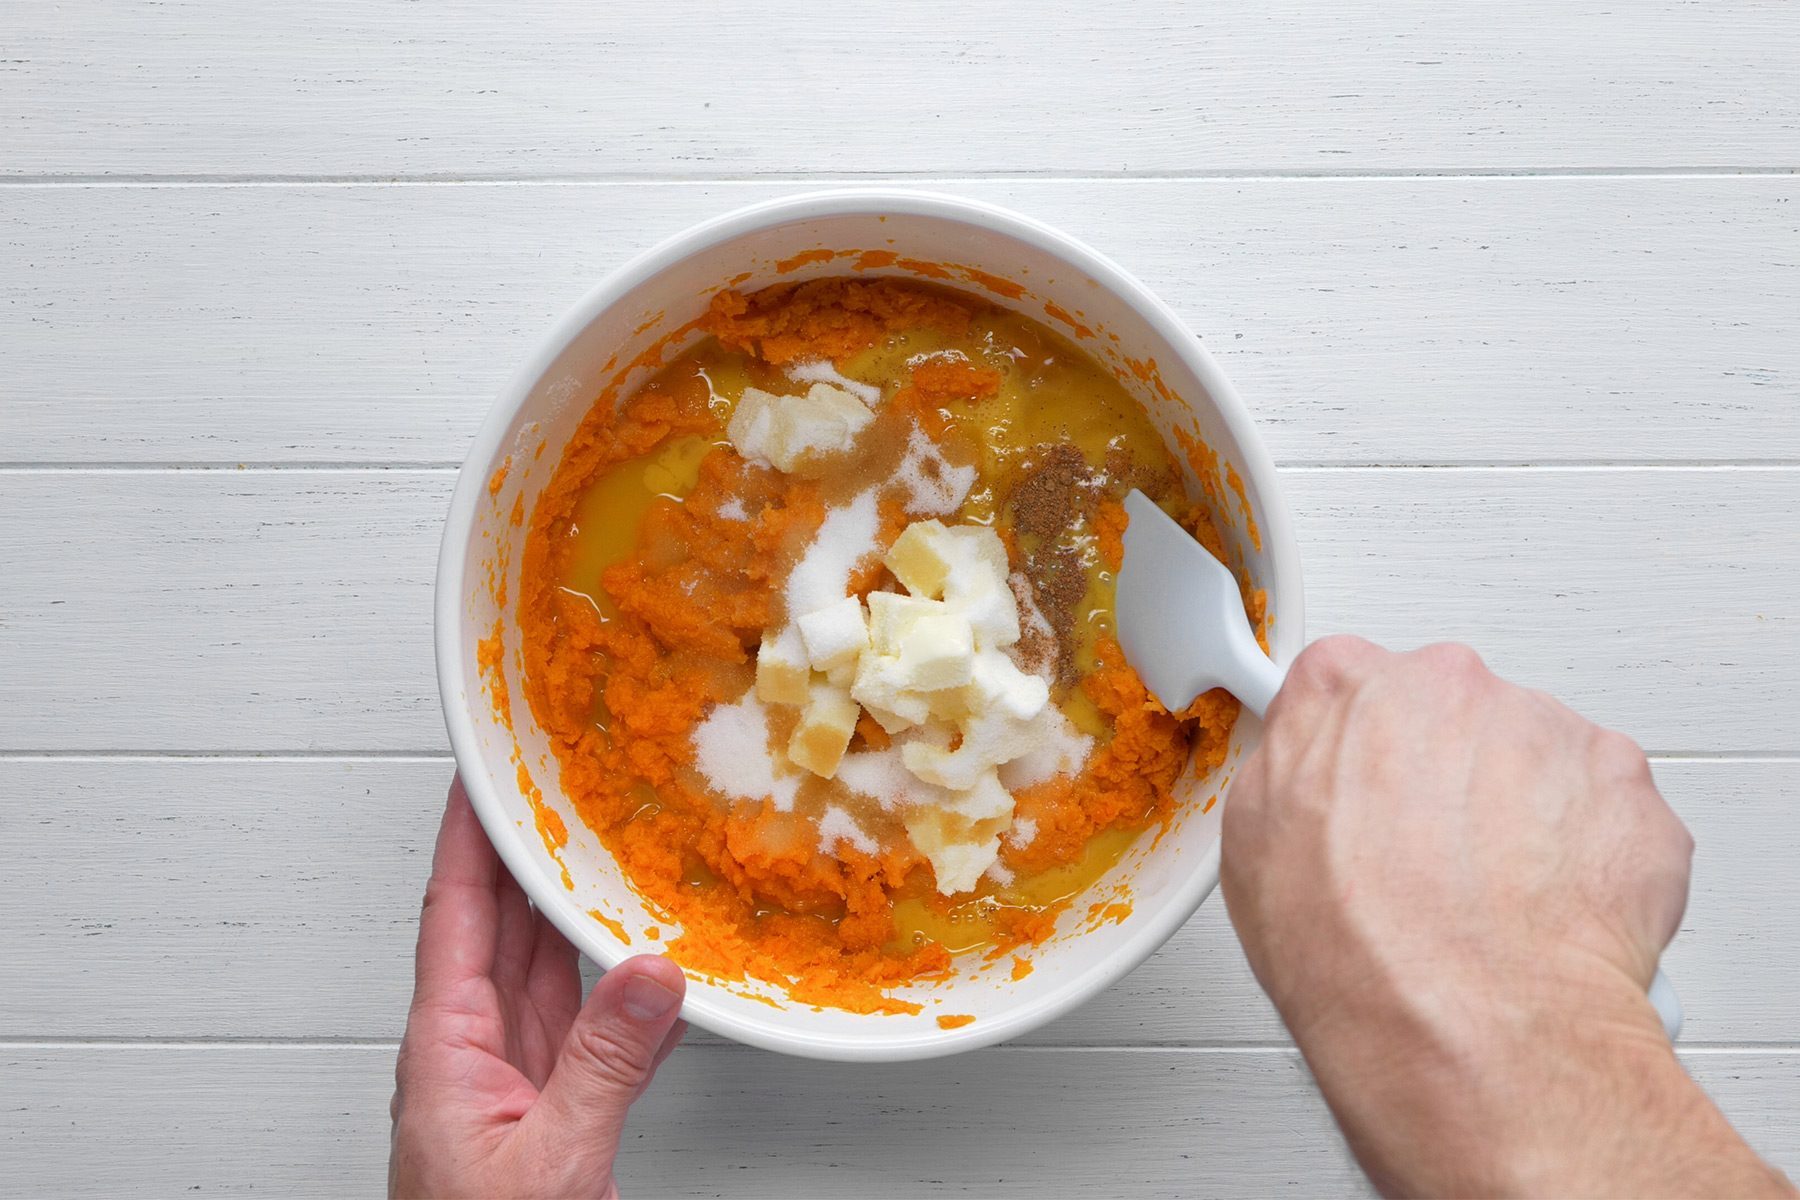 A person's hands are seen holding and mixing ingredients with a spatula in a white bowl. The bowl contains a mixture of mashed carrots, eggs, sugar, and other ingredients, likely being prepared for baking. The background is a light wooden surface.